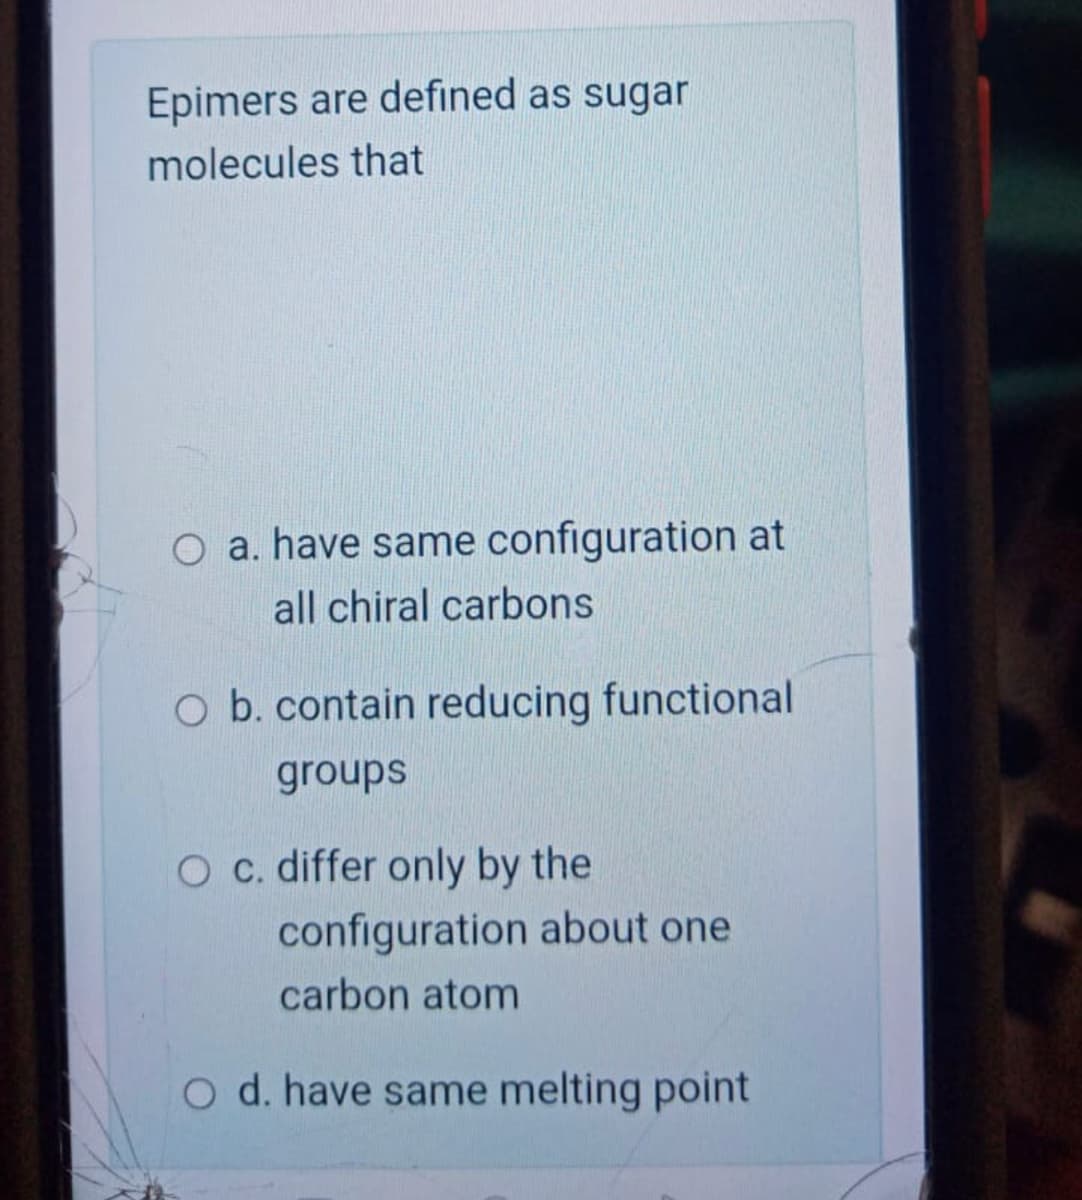 Epimers are defined as sugar
molecules that
O a. have same configuration at
all chiral carbons
O b. contain reducing functional
groups
O c. differ only by the
configuration about one
carbon atom
O d. have same melting point
